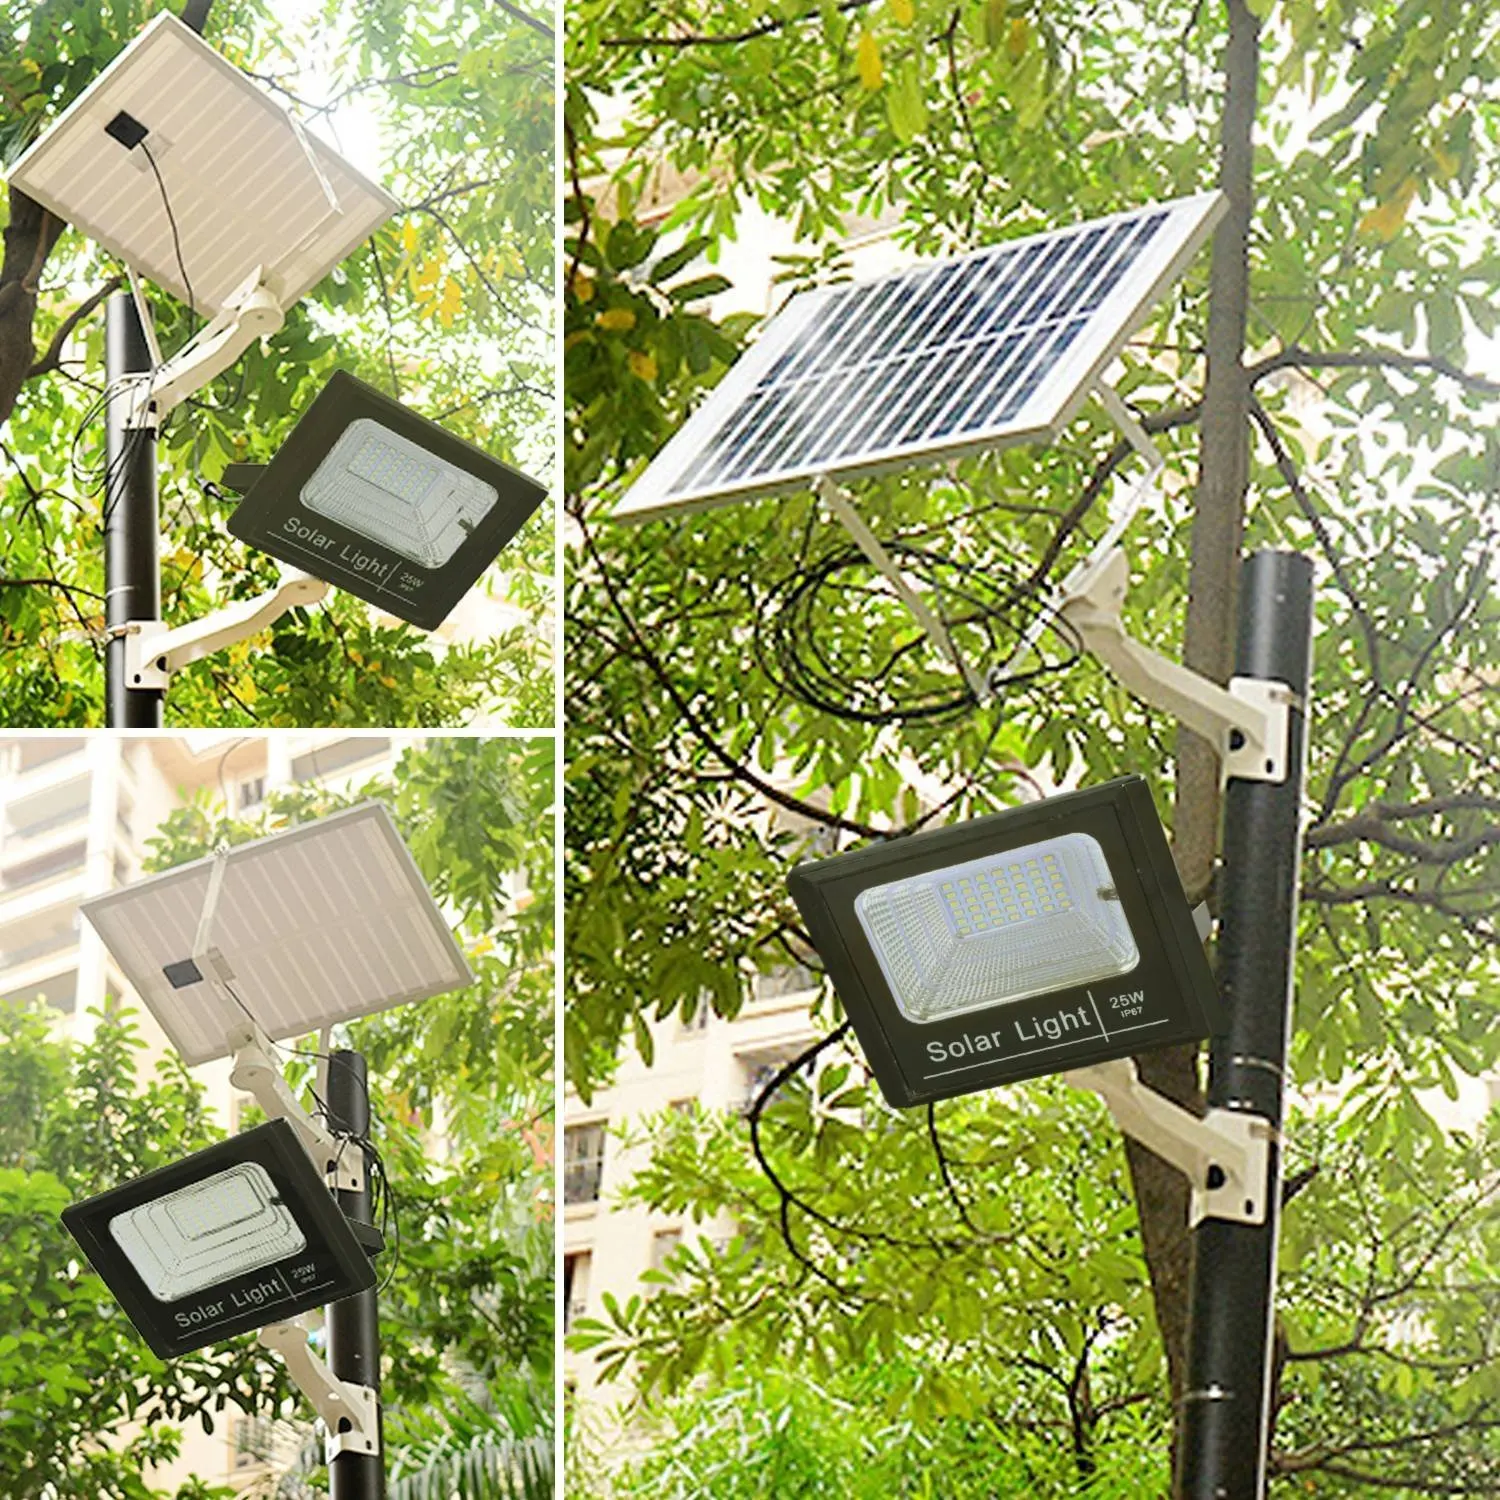 2018 Newest 25w 42led Outdoor Solar Flood Light With Waterproof Ip67 ...